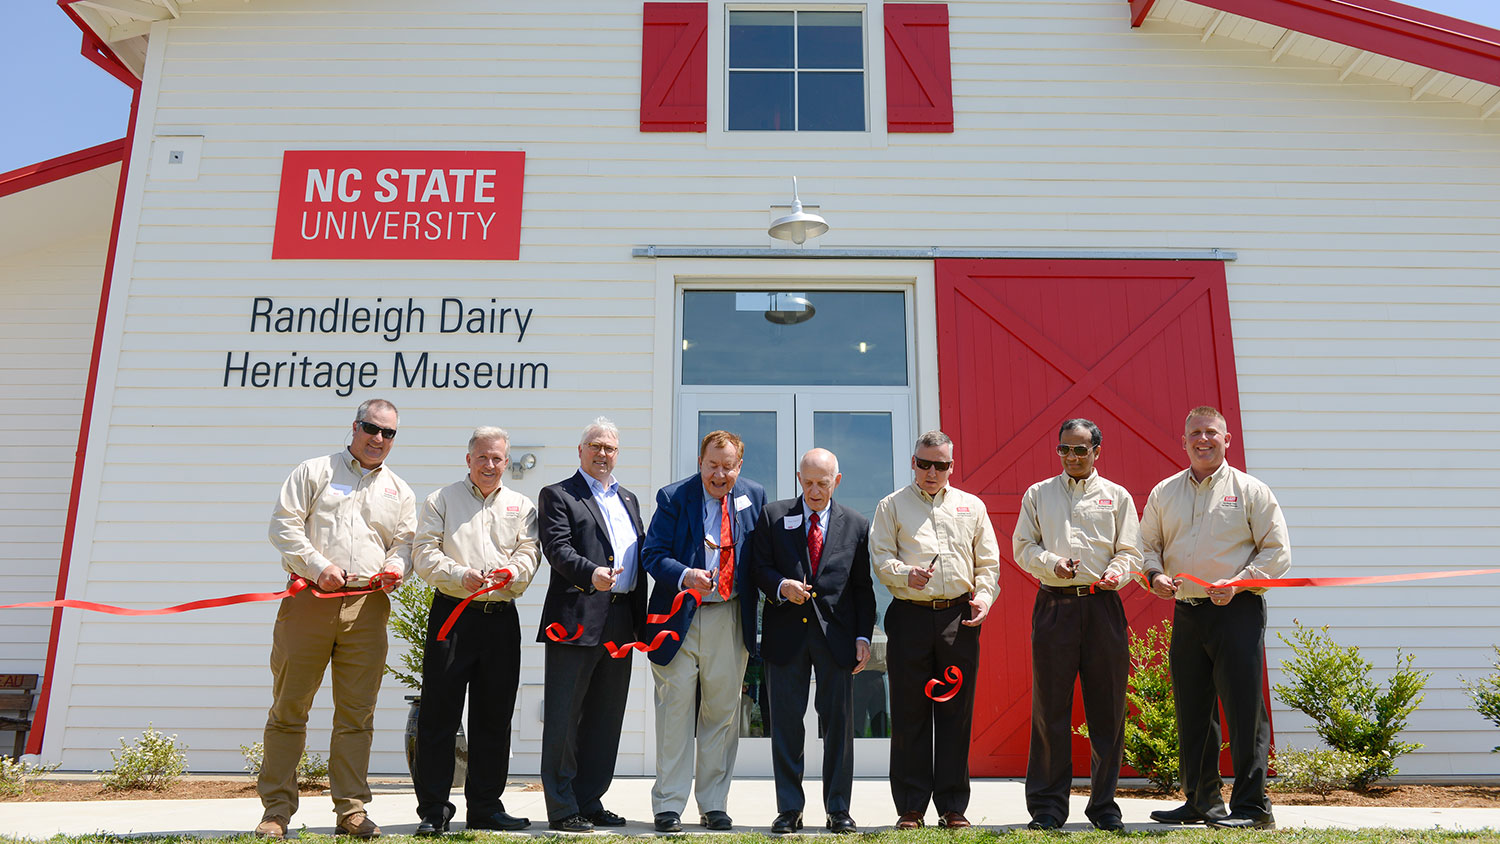 Group cutting ribbon in front of Randleigh Dairy Heritage Museum